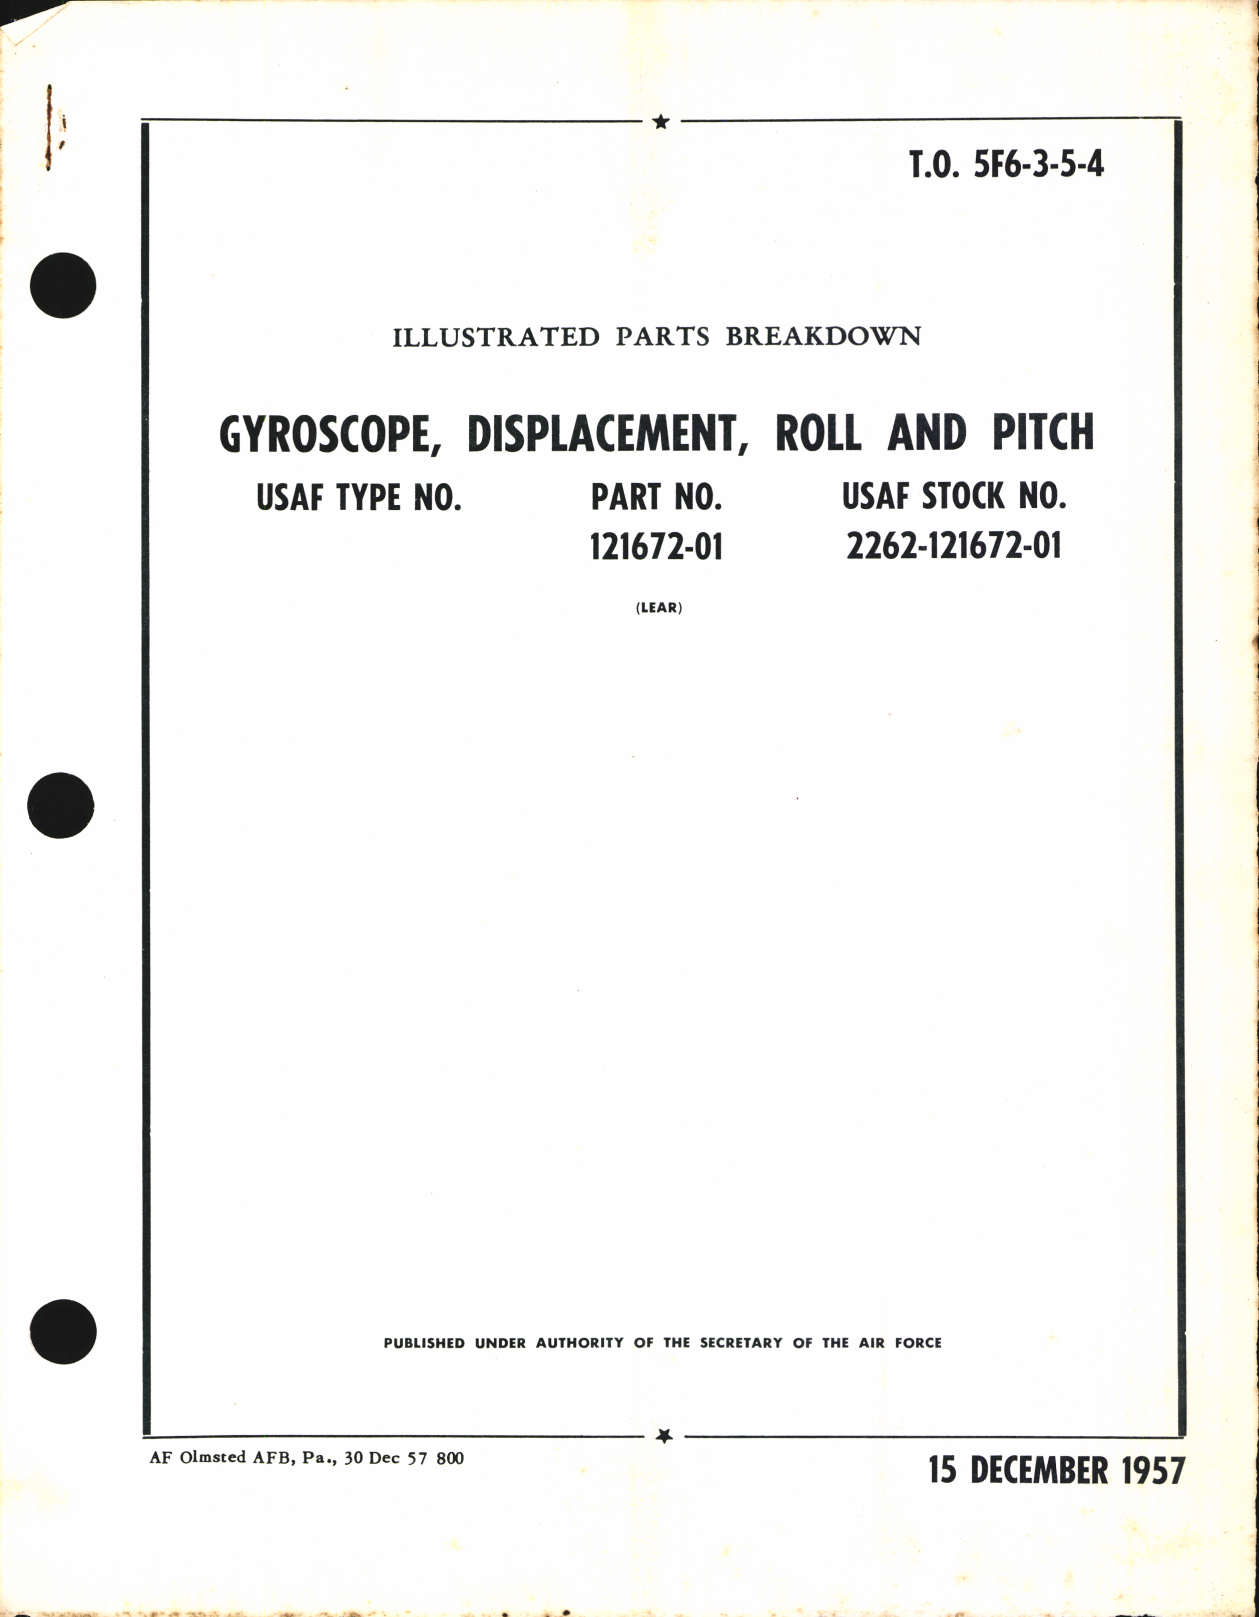 Sample page 1 from AirCorps Library document: Illustrated Parts Breakdown for Gyroscope, Displacement, Roll and Pitch